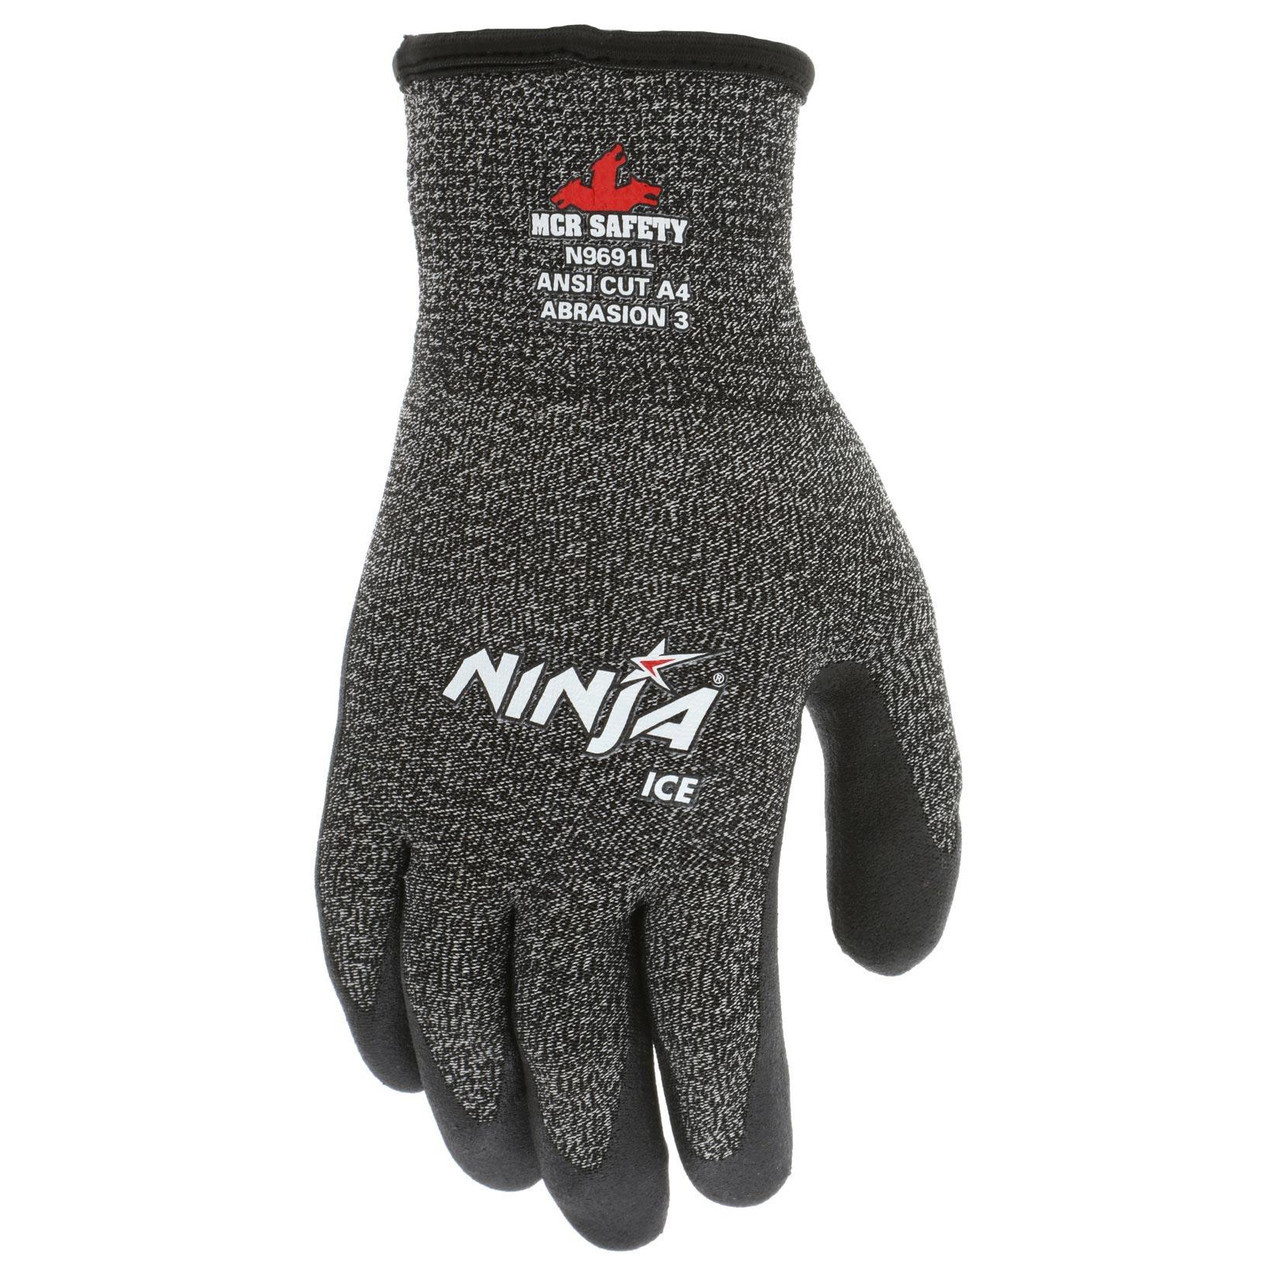 Combating Cold Weather: Ninja Ice Gloves